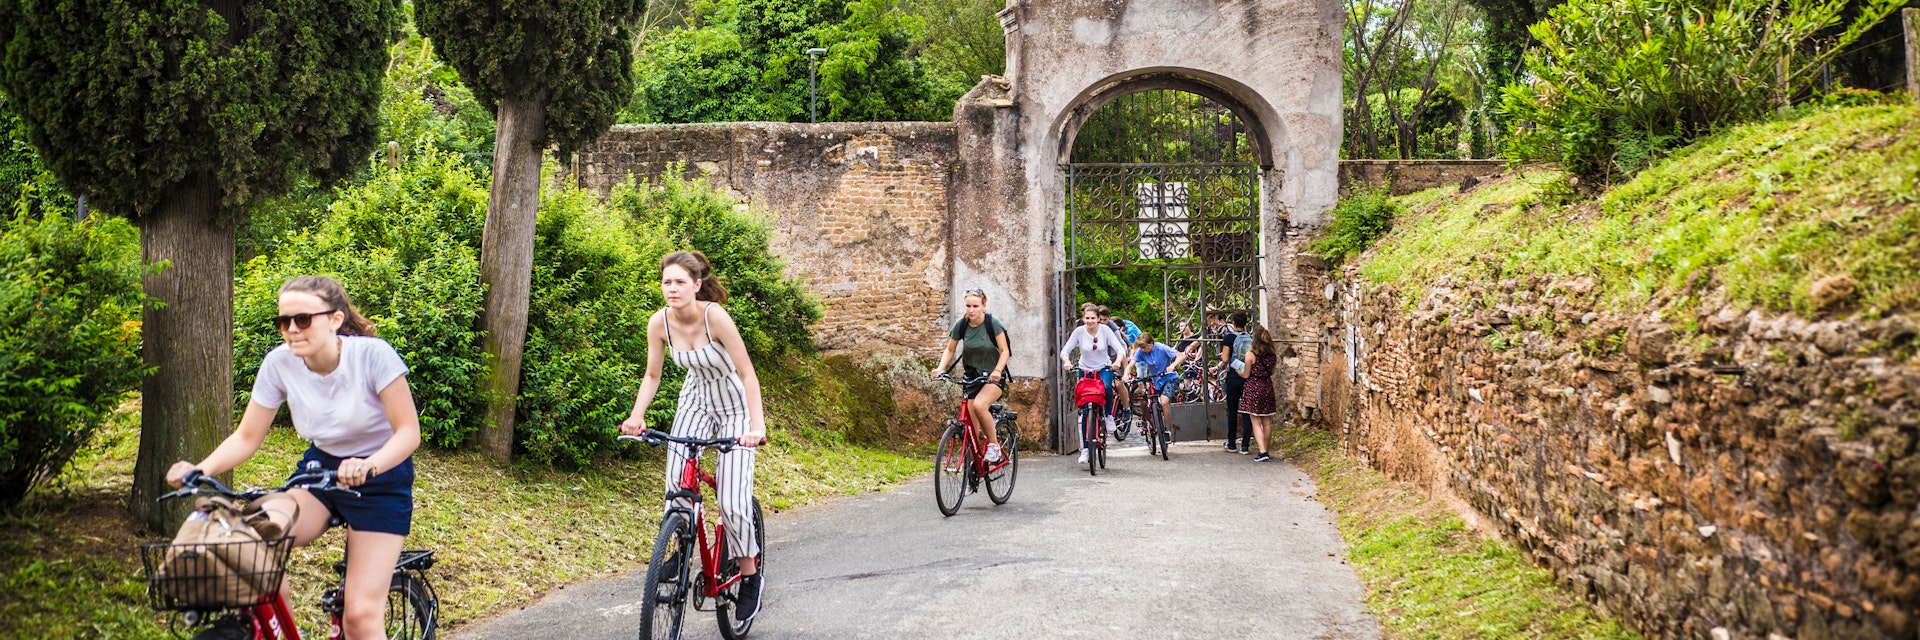 ROME, ITALY - May 2018: Cycling people at the entrance gate to the Catacombe di San Callisto cave historical town in Rome, Italy; Shutterstock ID 1301255716; purchase_order: 65050; job: poi; client: ; other:
1301255716